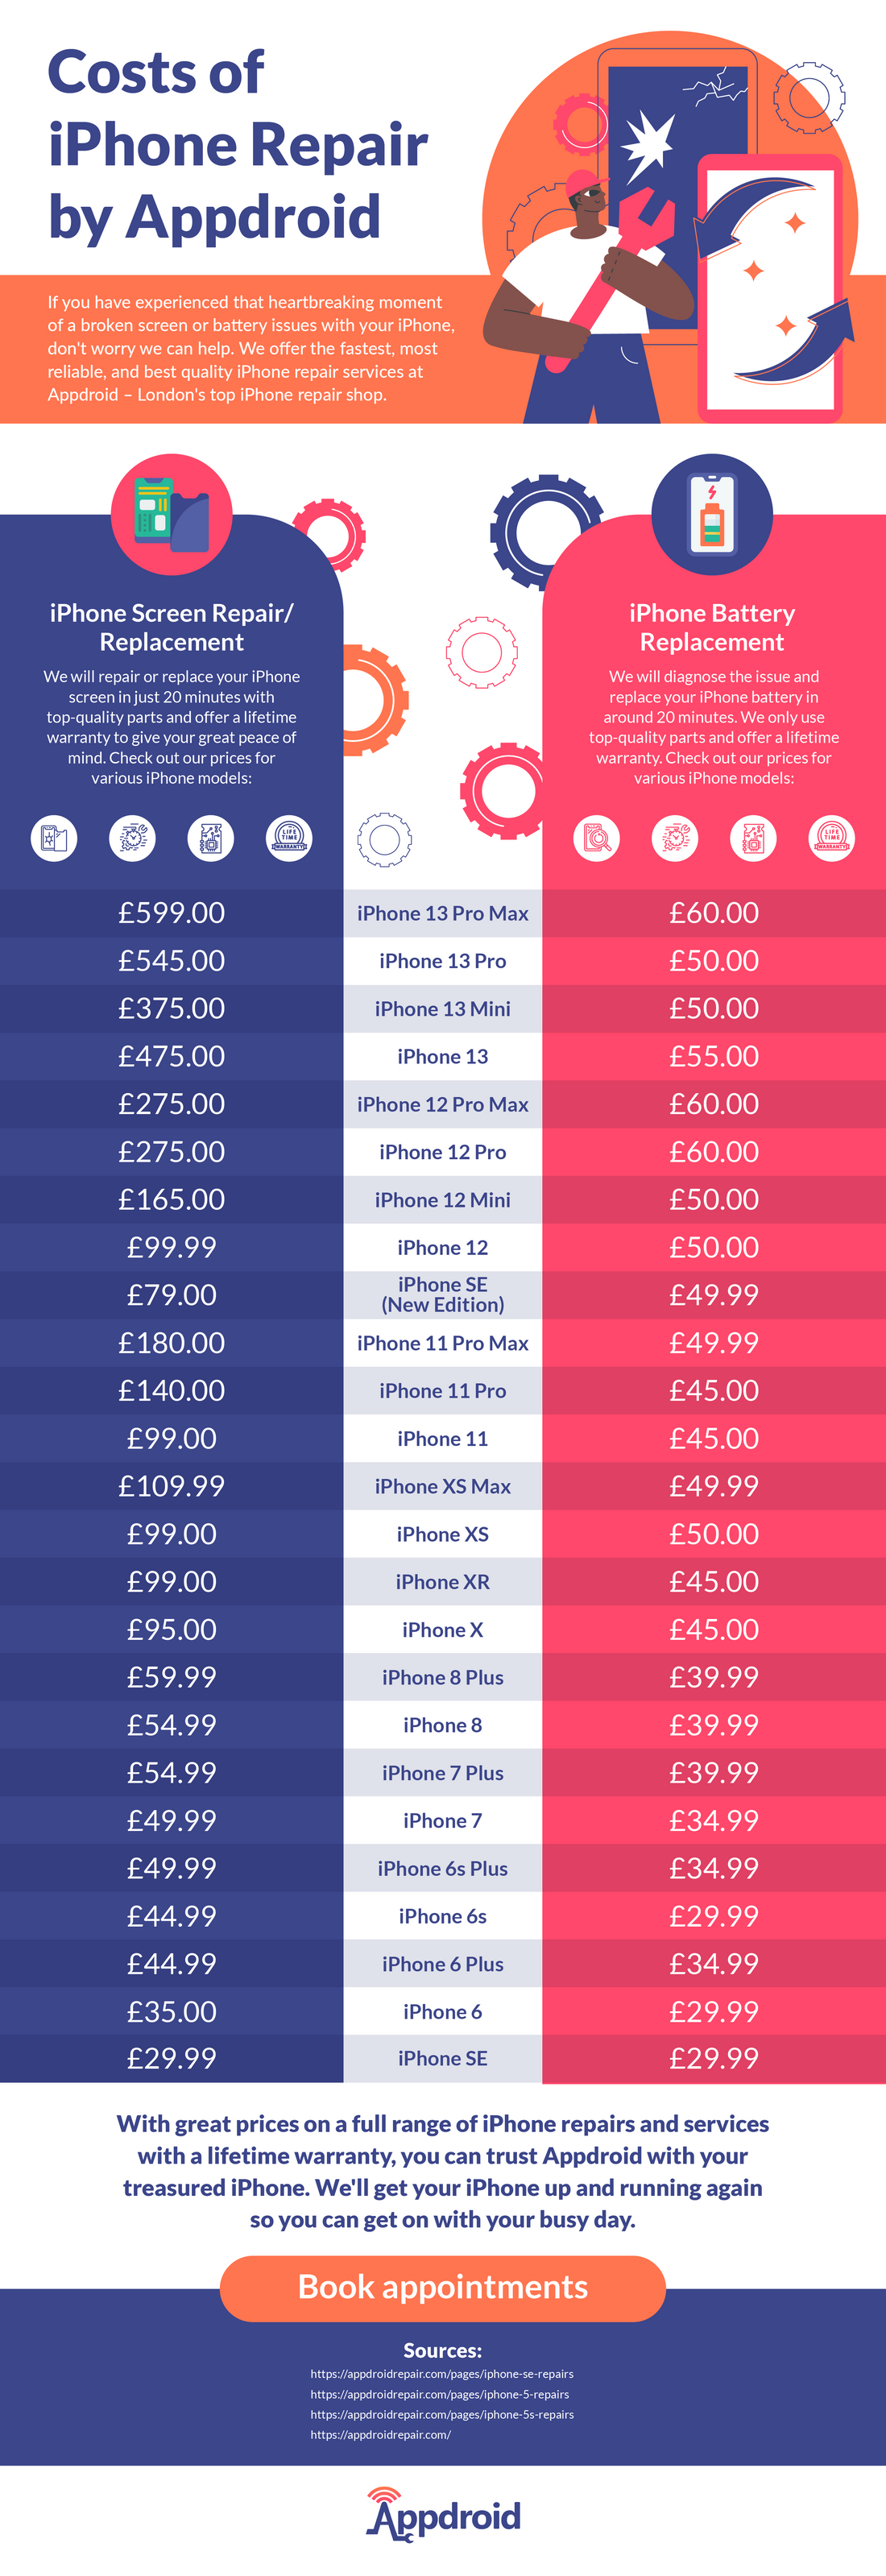 Costs of iPhone Repairs by Appdroid